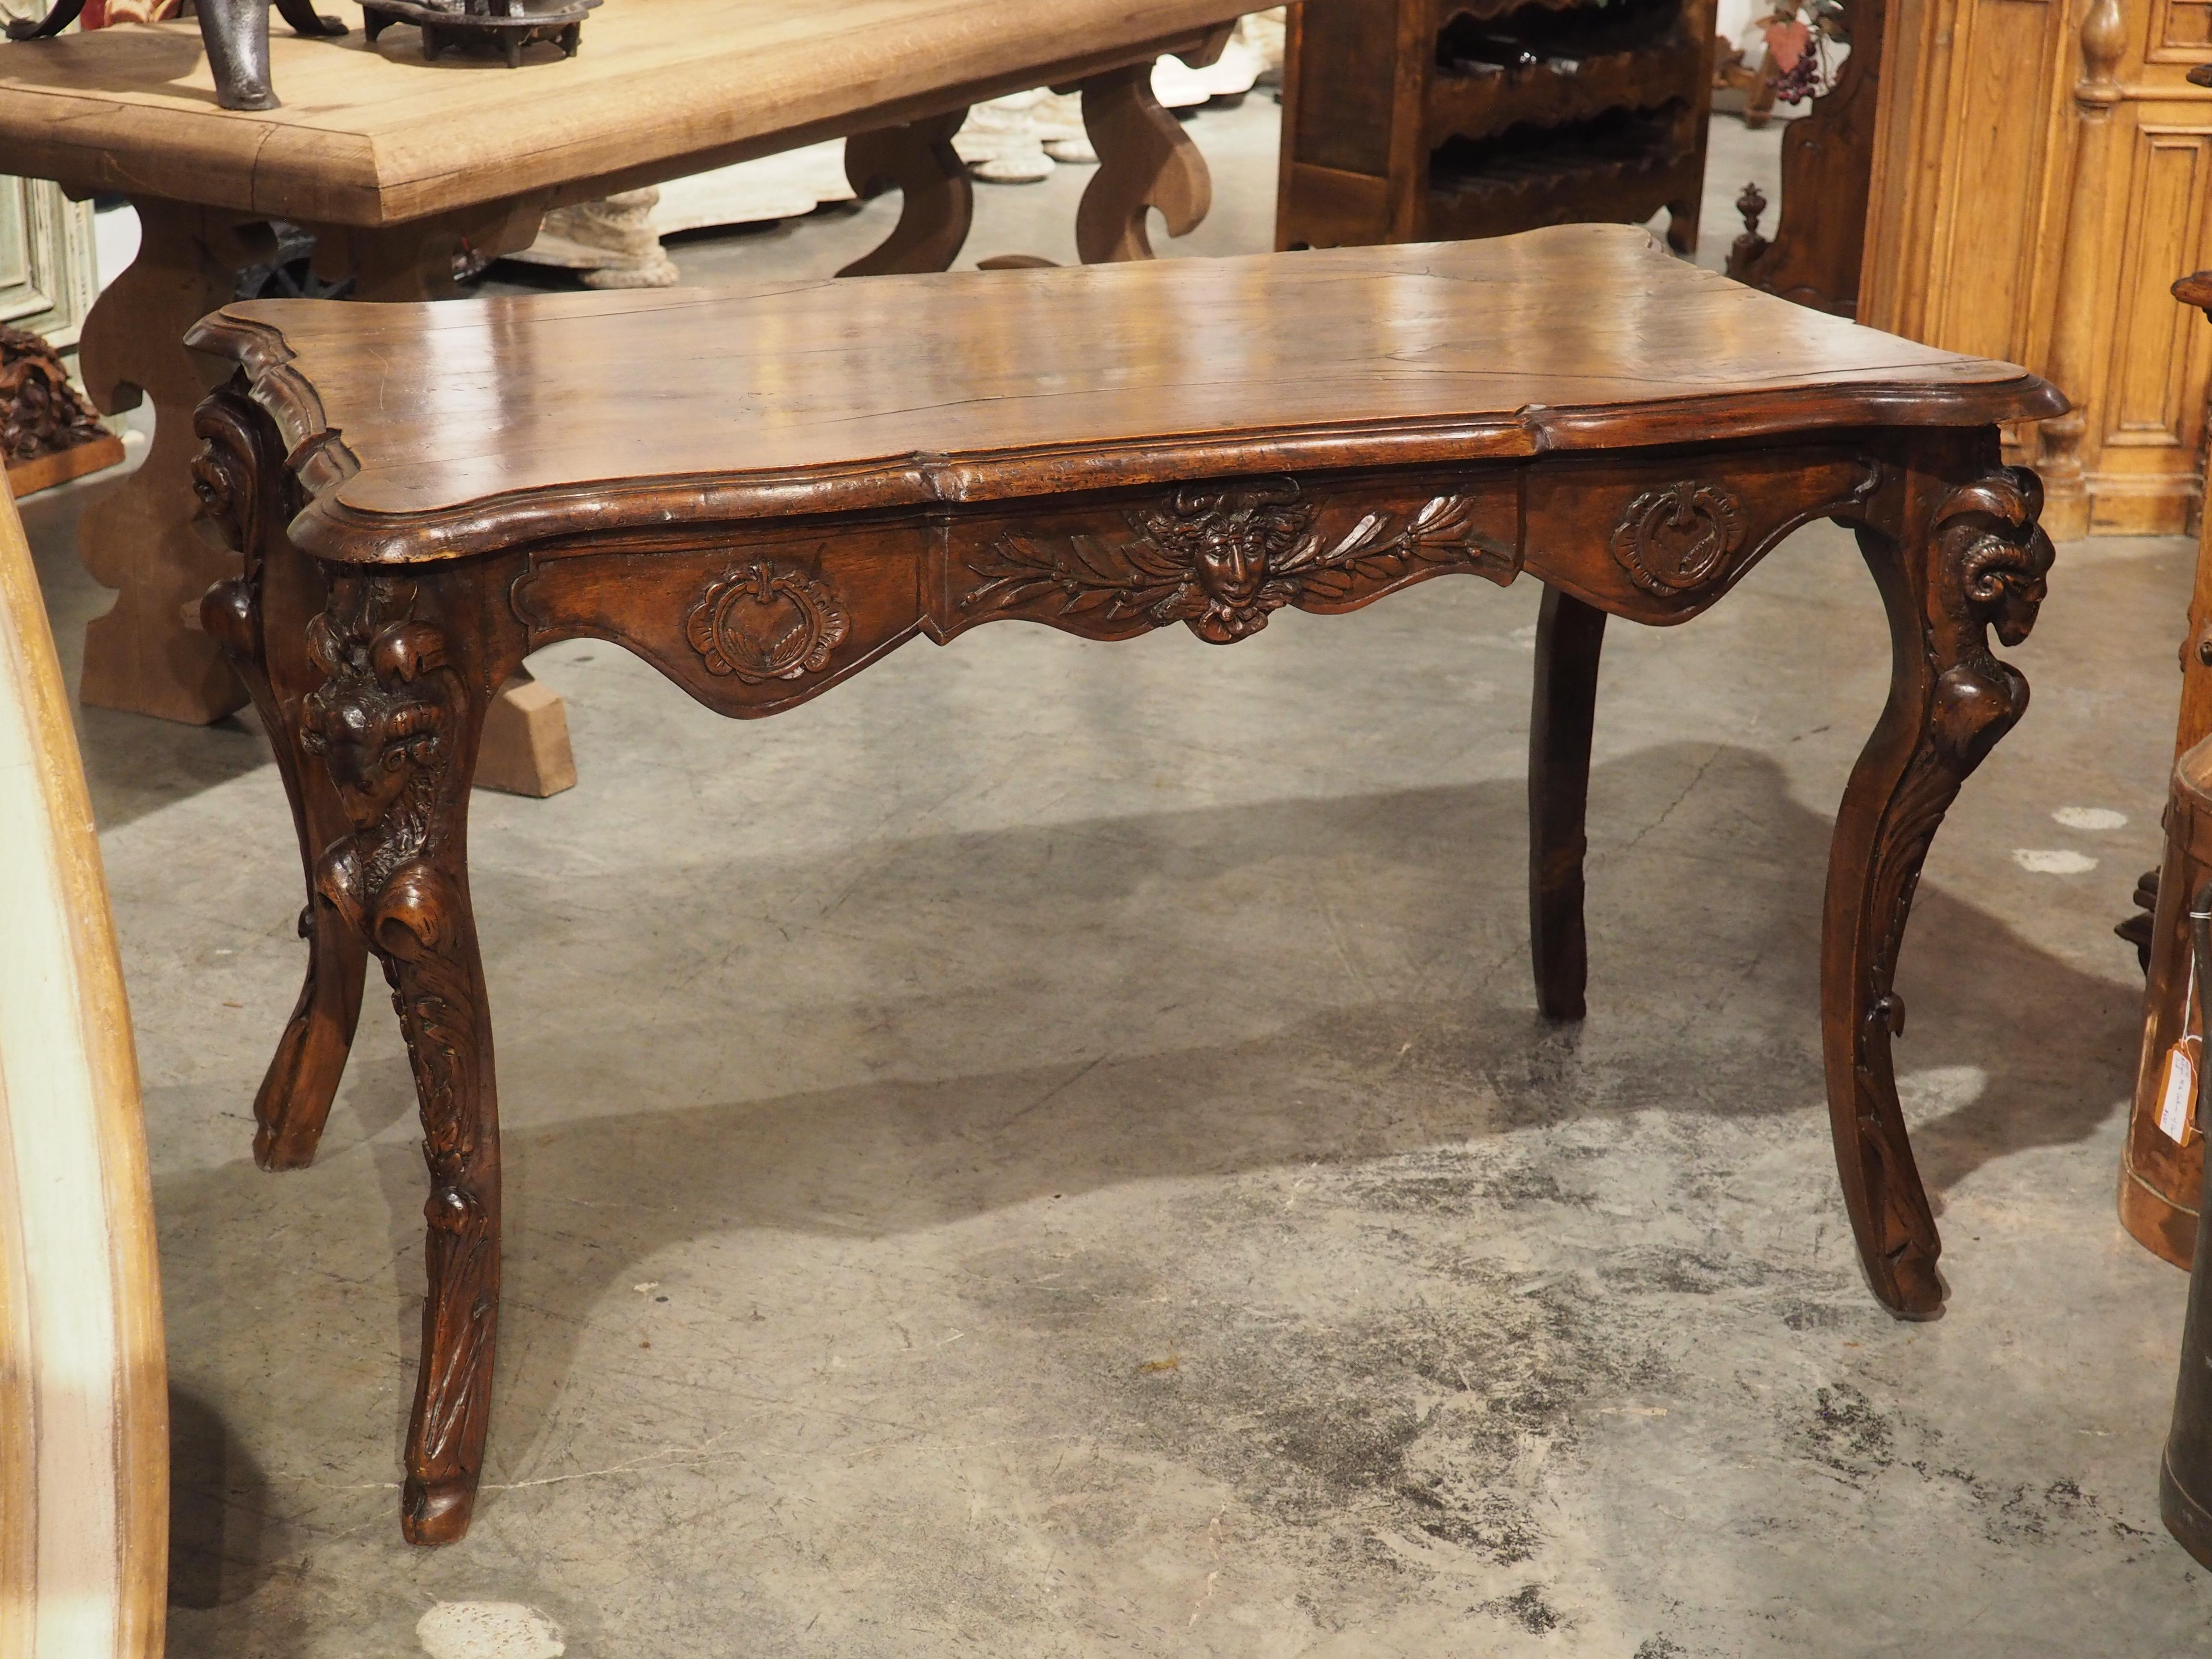 Circa 1870 French Walnut Wood Center Table with Rams' Heads and Fleur De Lys For Sale 14